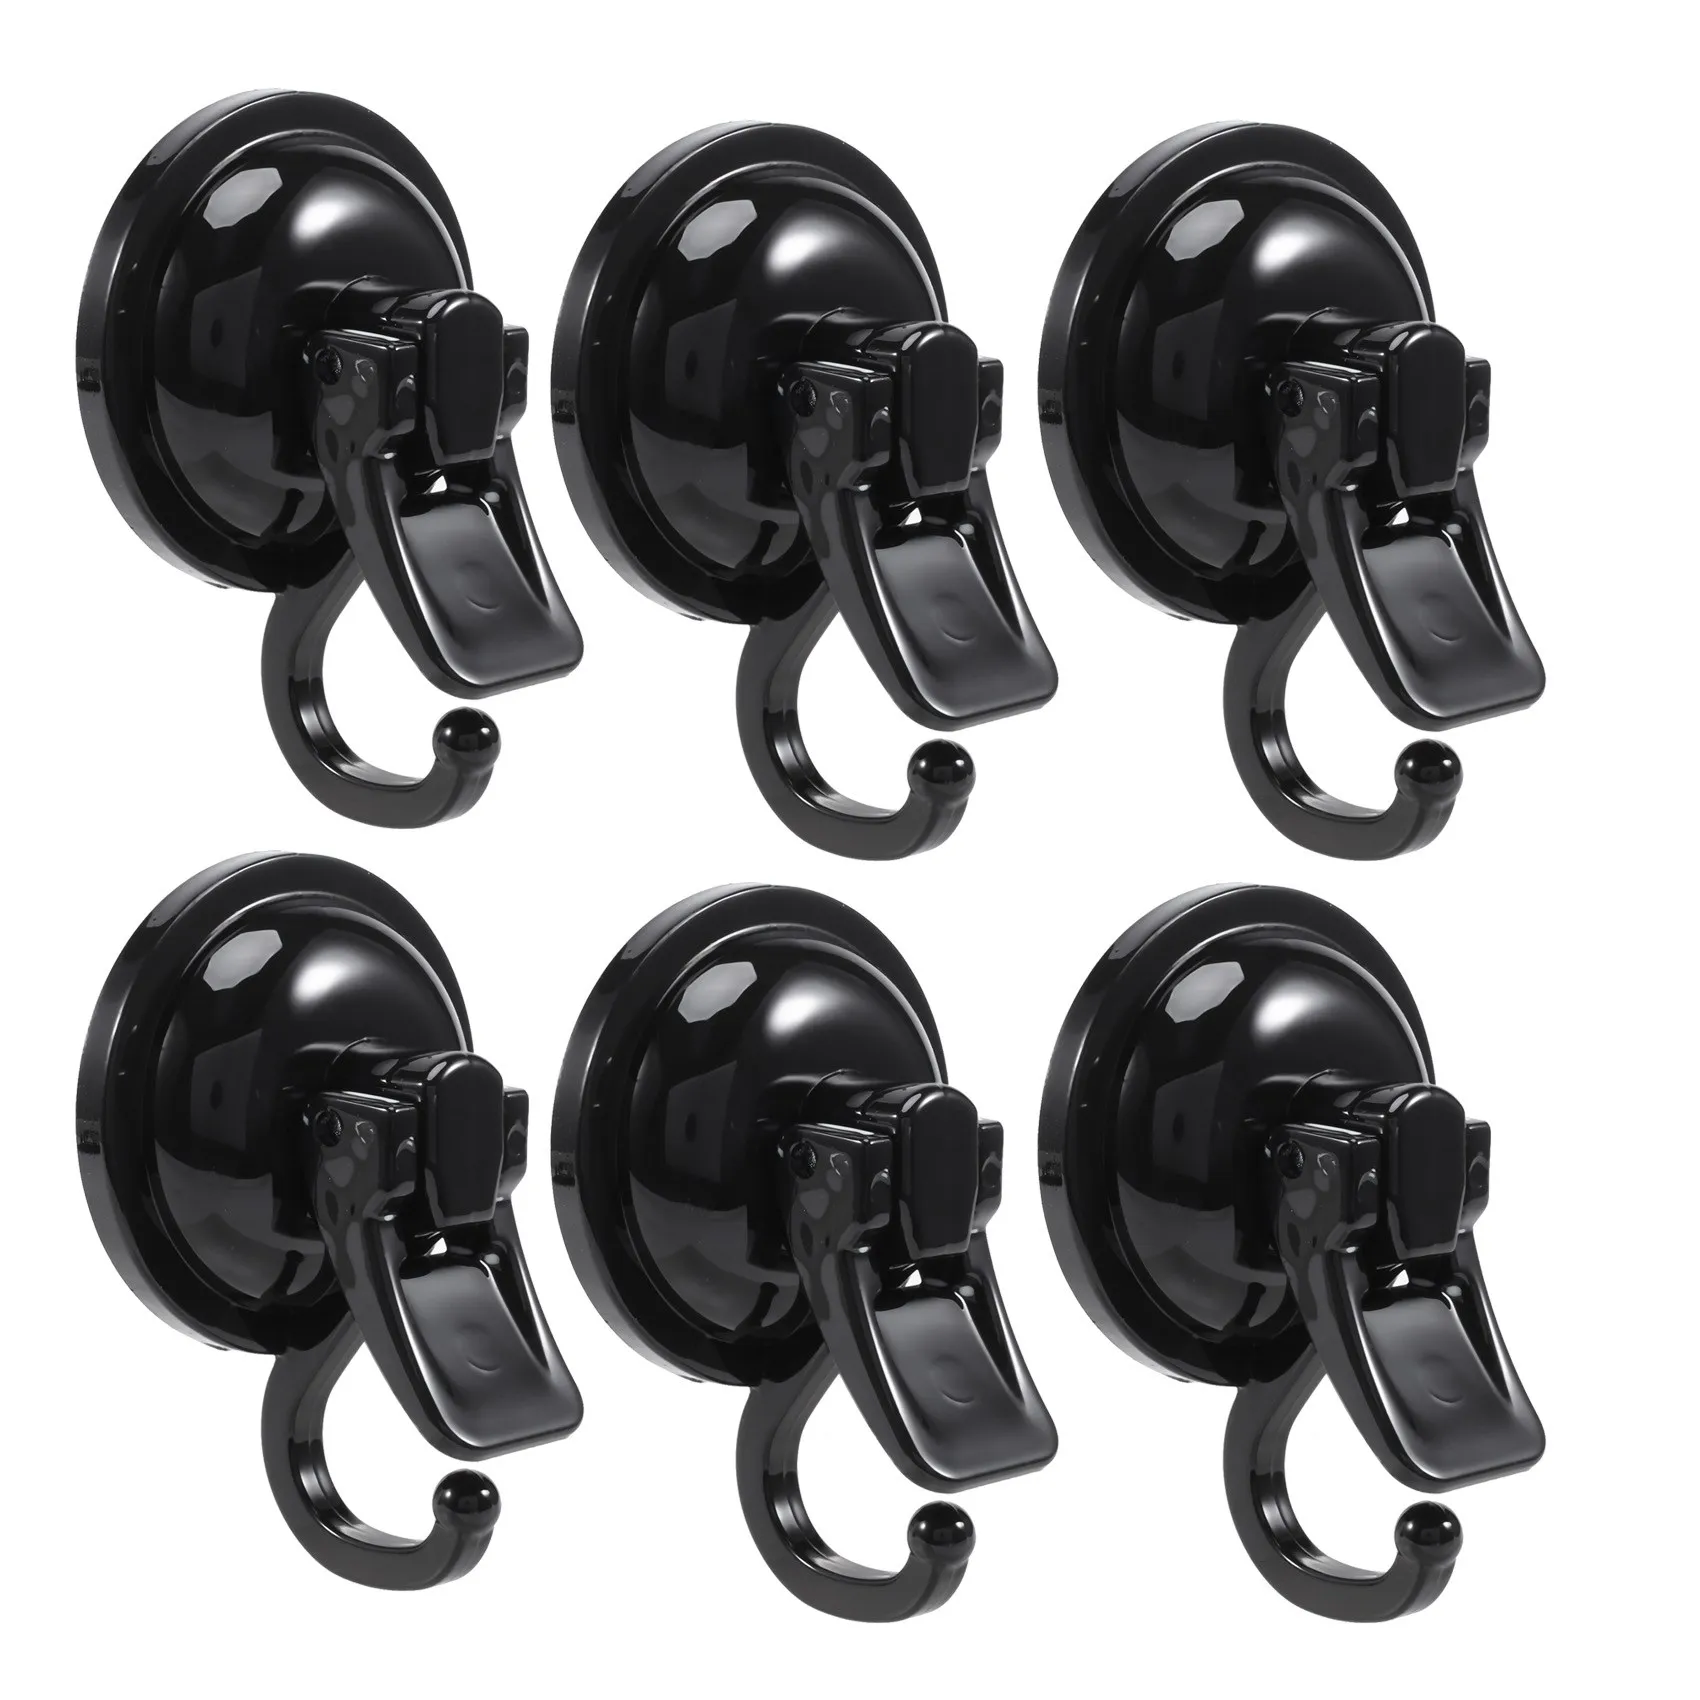 

6Pack Heavy Duty Vacuum Suction Cup Hooks Powerful Hooks Wreath Hanger Easy to Install and Removable for Bathroom Black